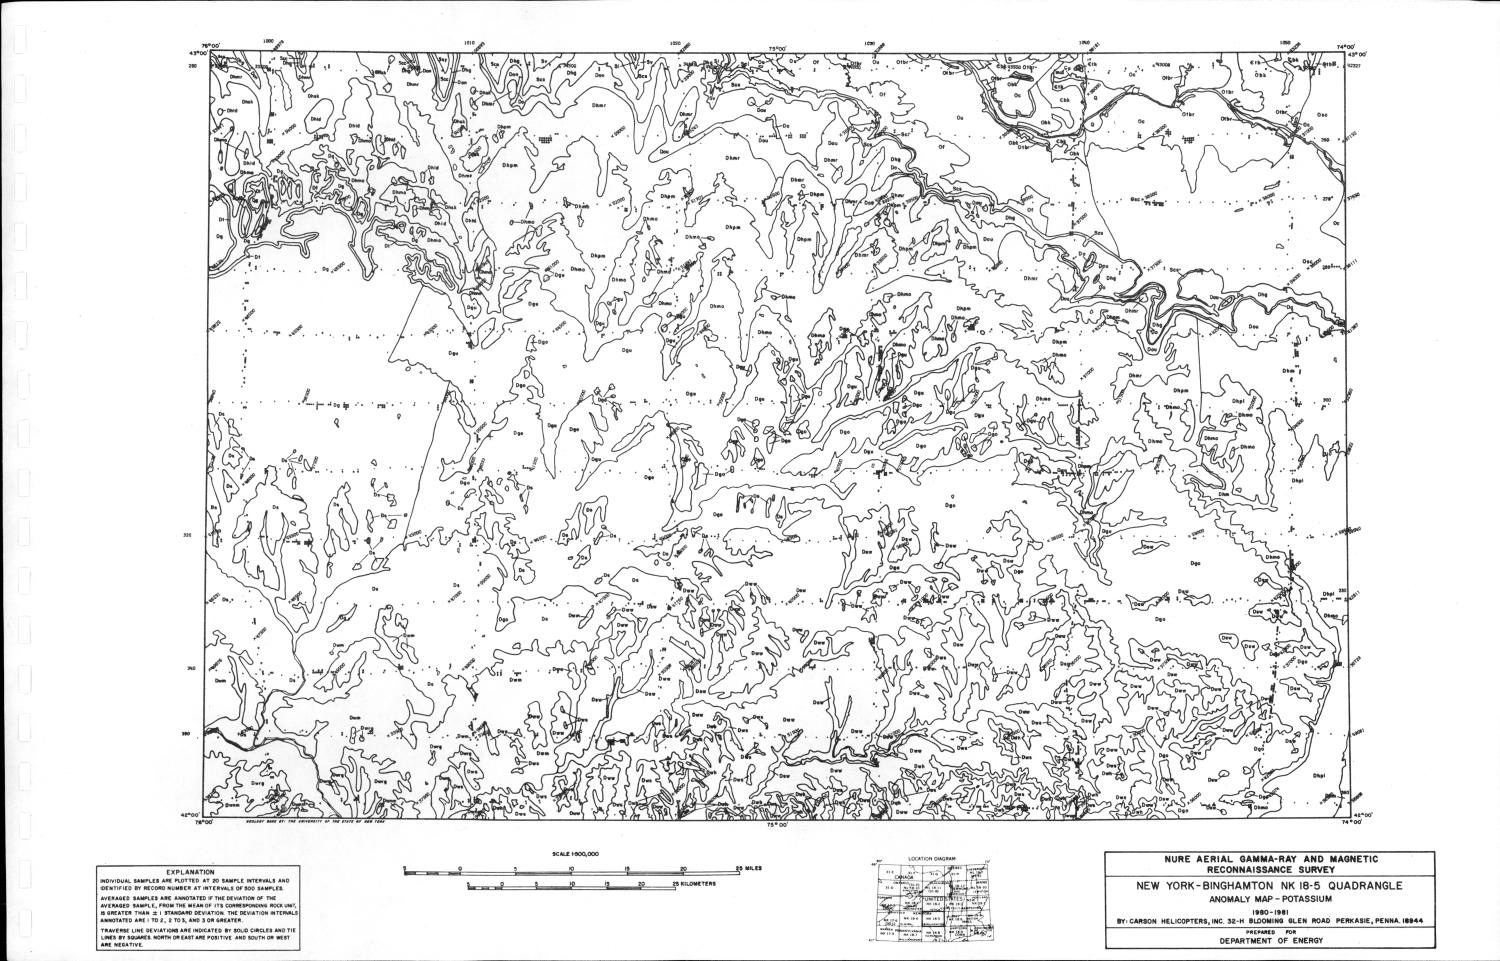 NURE Aerial Gamma Ray and Magnetic Reconnaissance Survey of Maine and Portions of New York, Final Report: Volume 2. Binghamton (NK 18-5) Quadrangle
                                                
                                                    4
                                                